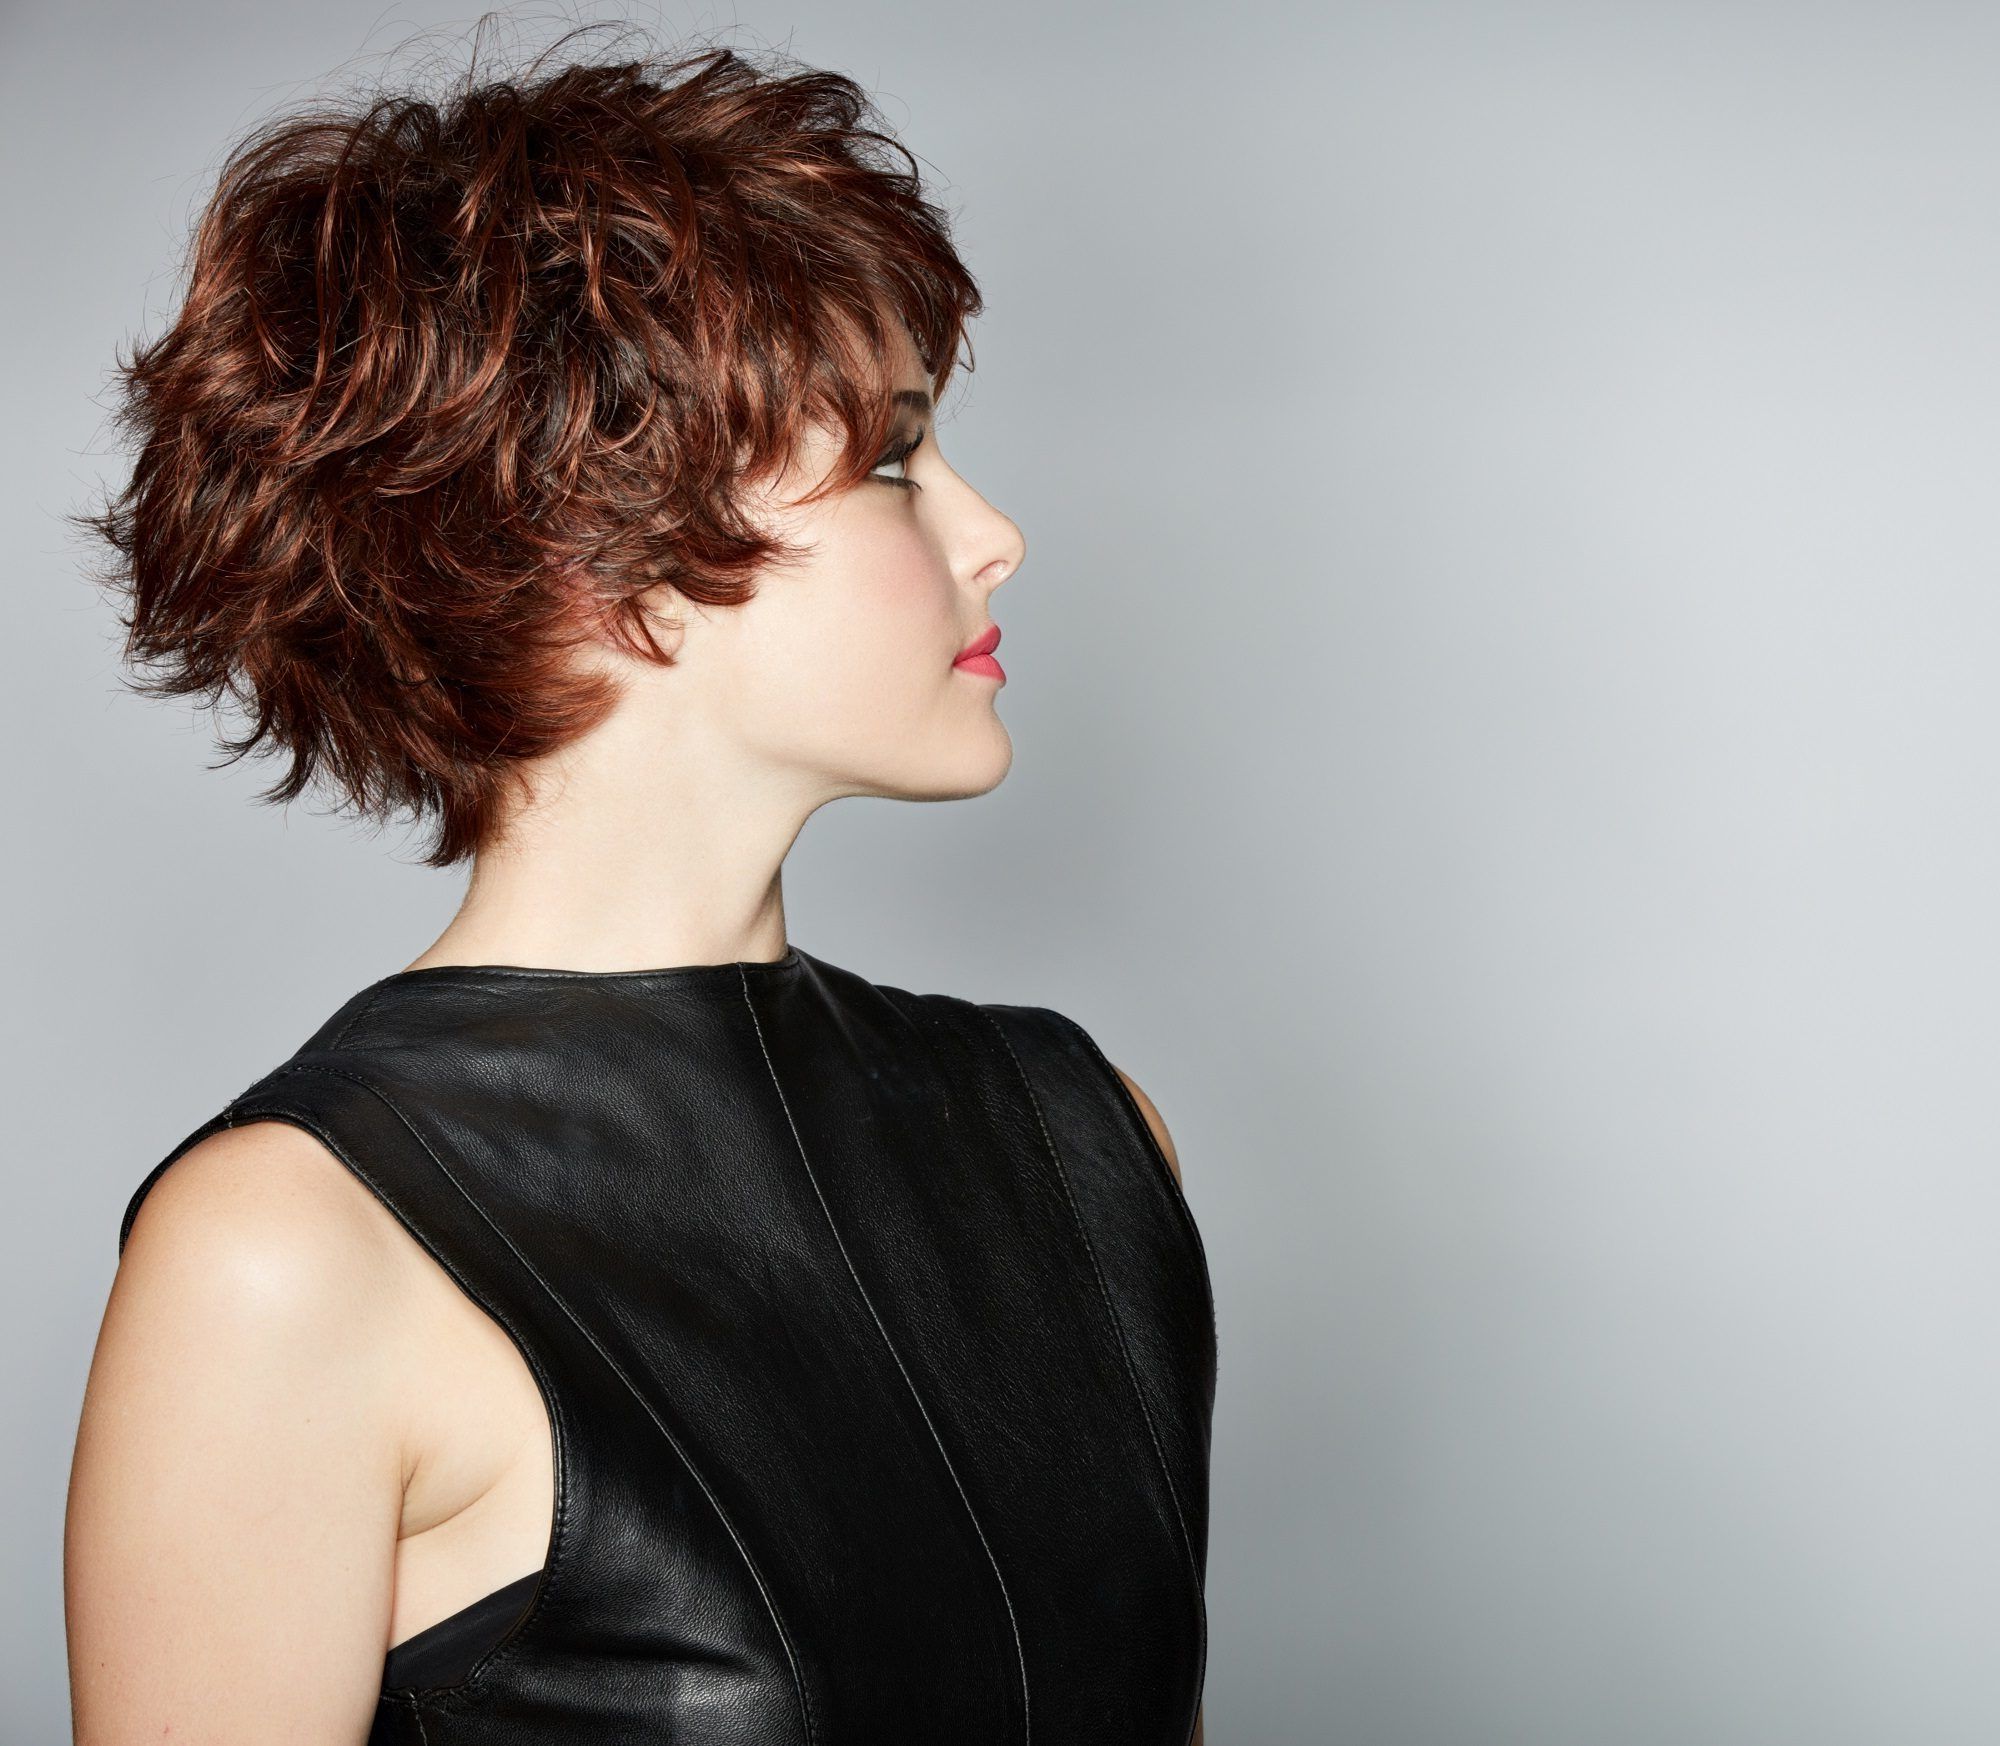 Short Hairstyles For Thick Hair: Chic And Edgy Looks To Try | All Things  Hair Ph Throughout Voluminous Pixie Hairstyles With Wavy Texture (View 15 of 25)